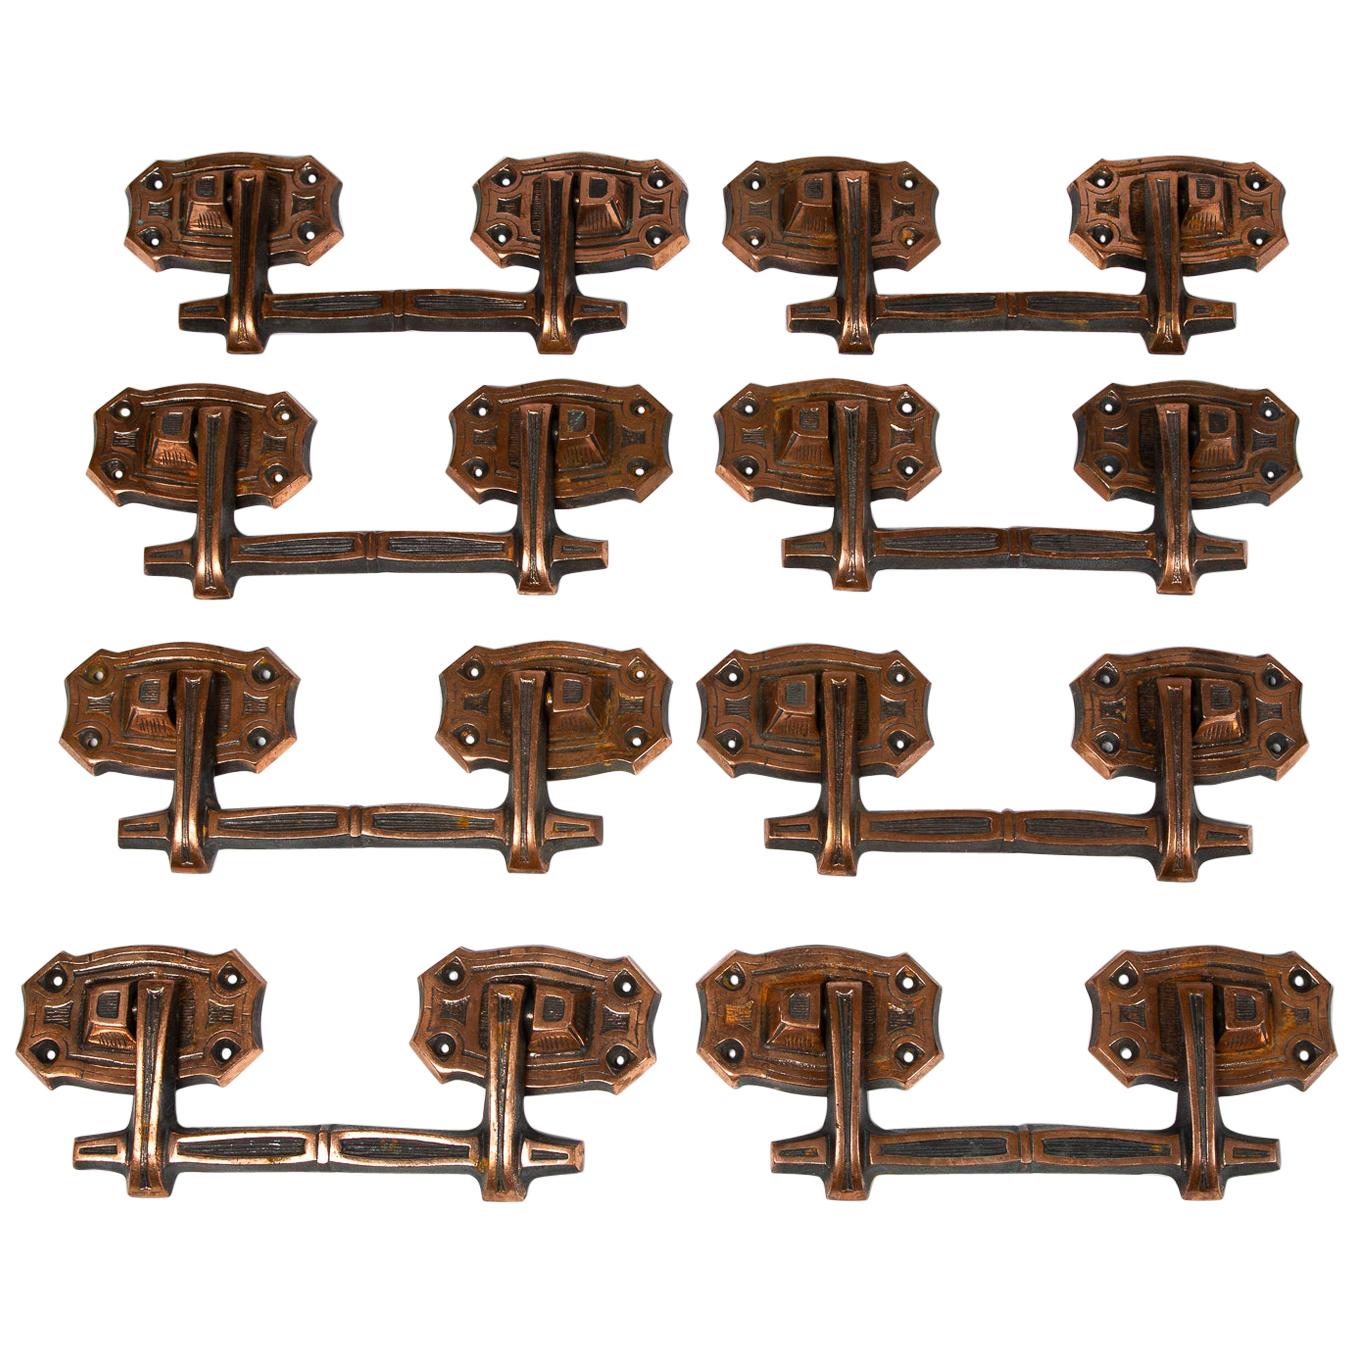 Set of 8 Copper-Plated Iron Handles, French, circa 1900